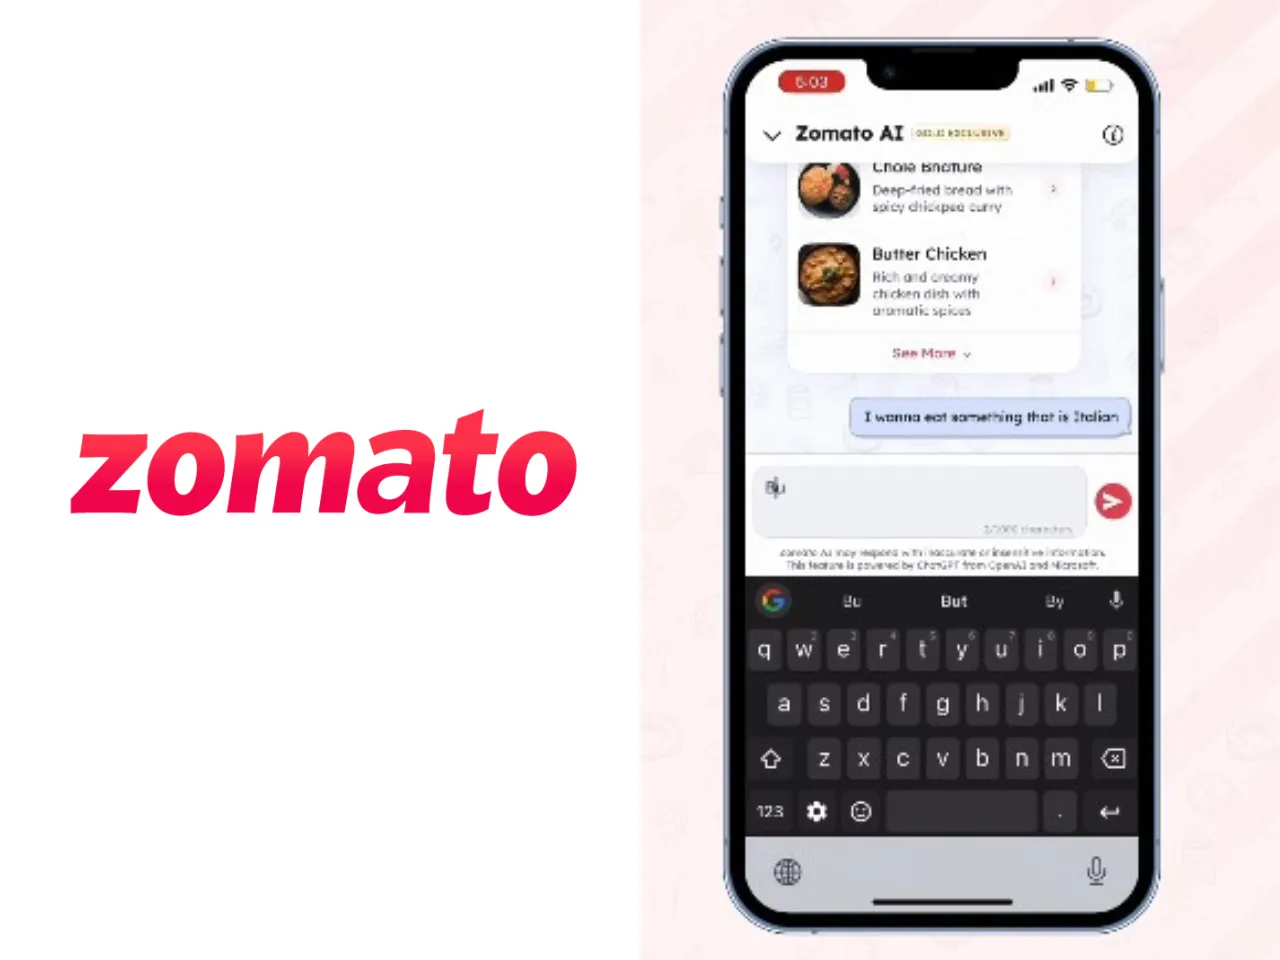 Foodtech giant Zomato launches Zomato AI chatbot to help customers place orders